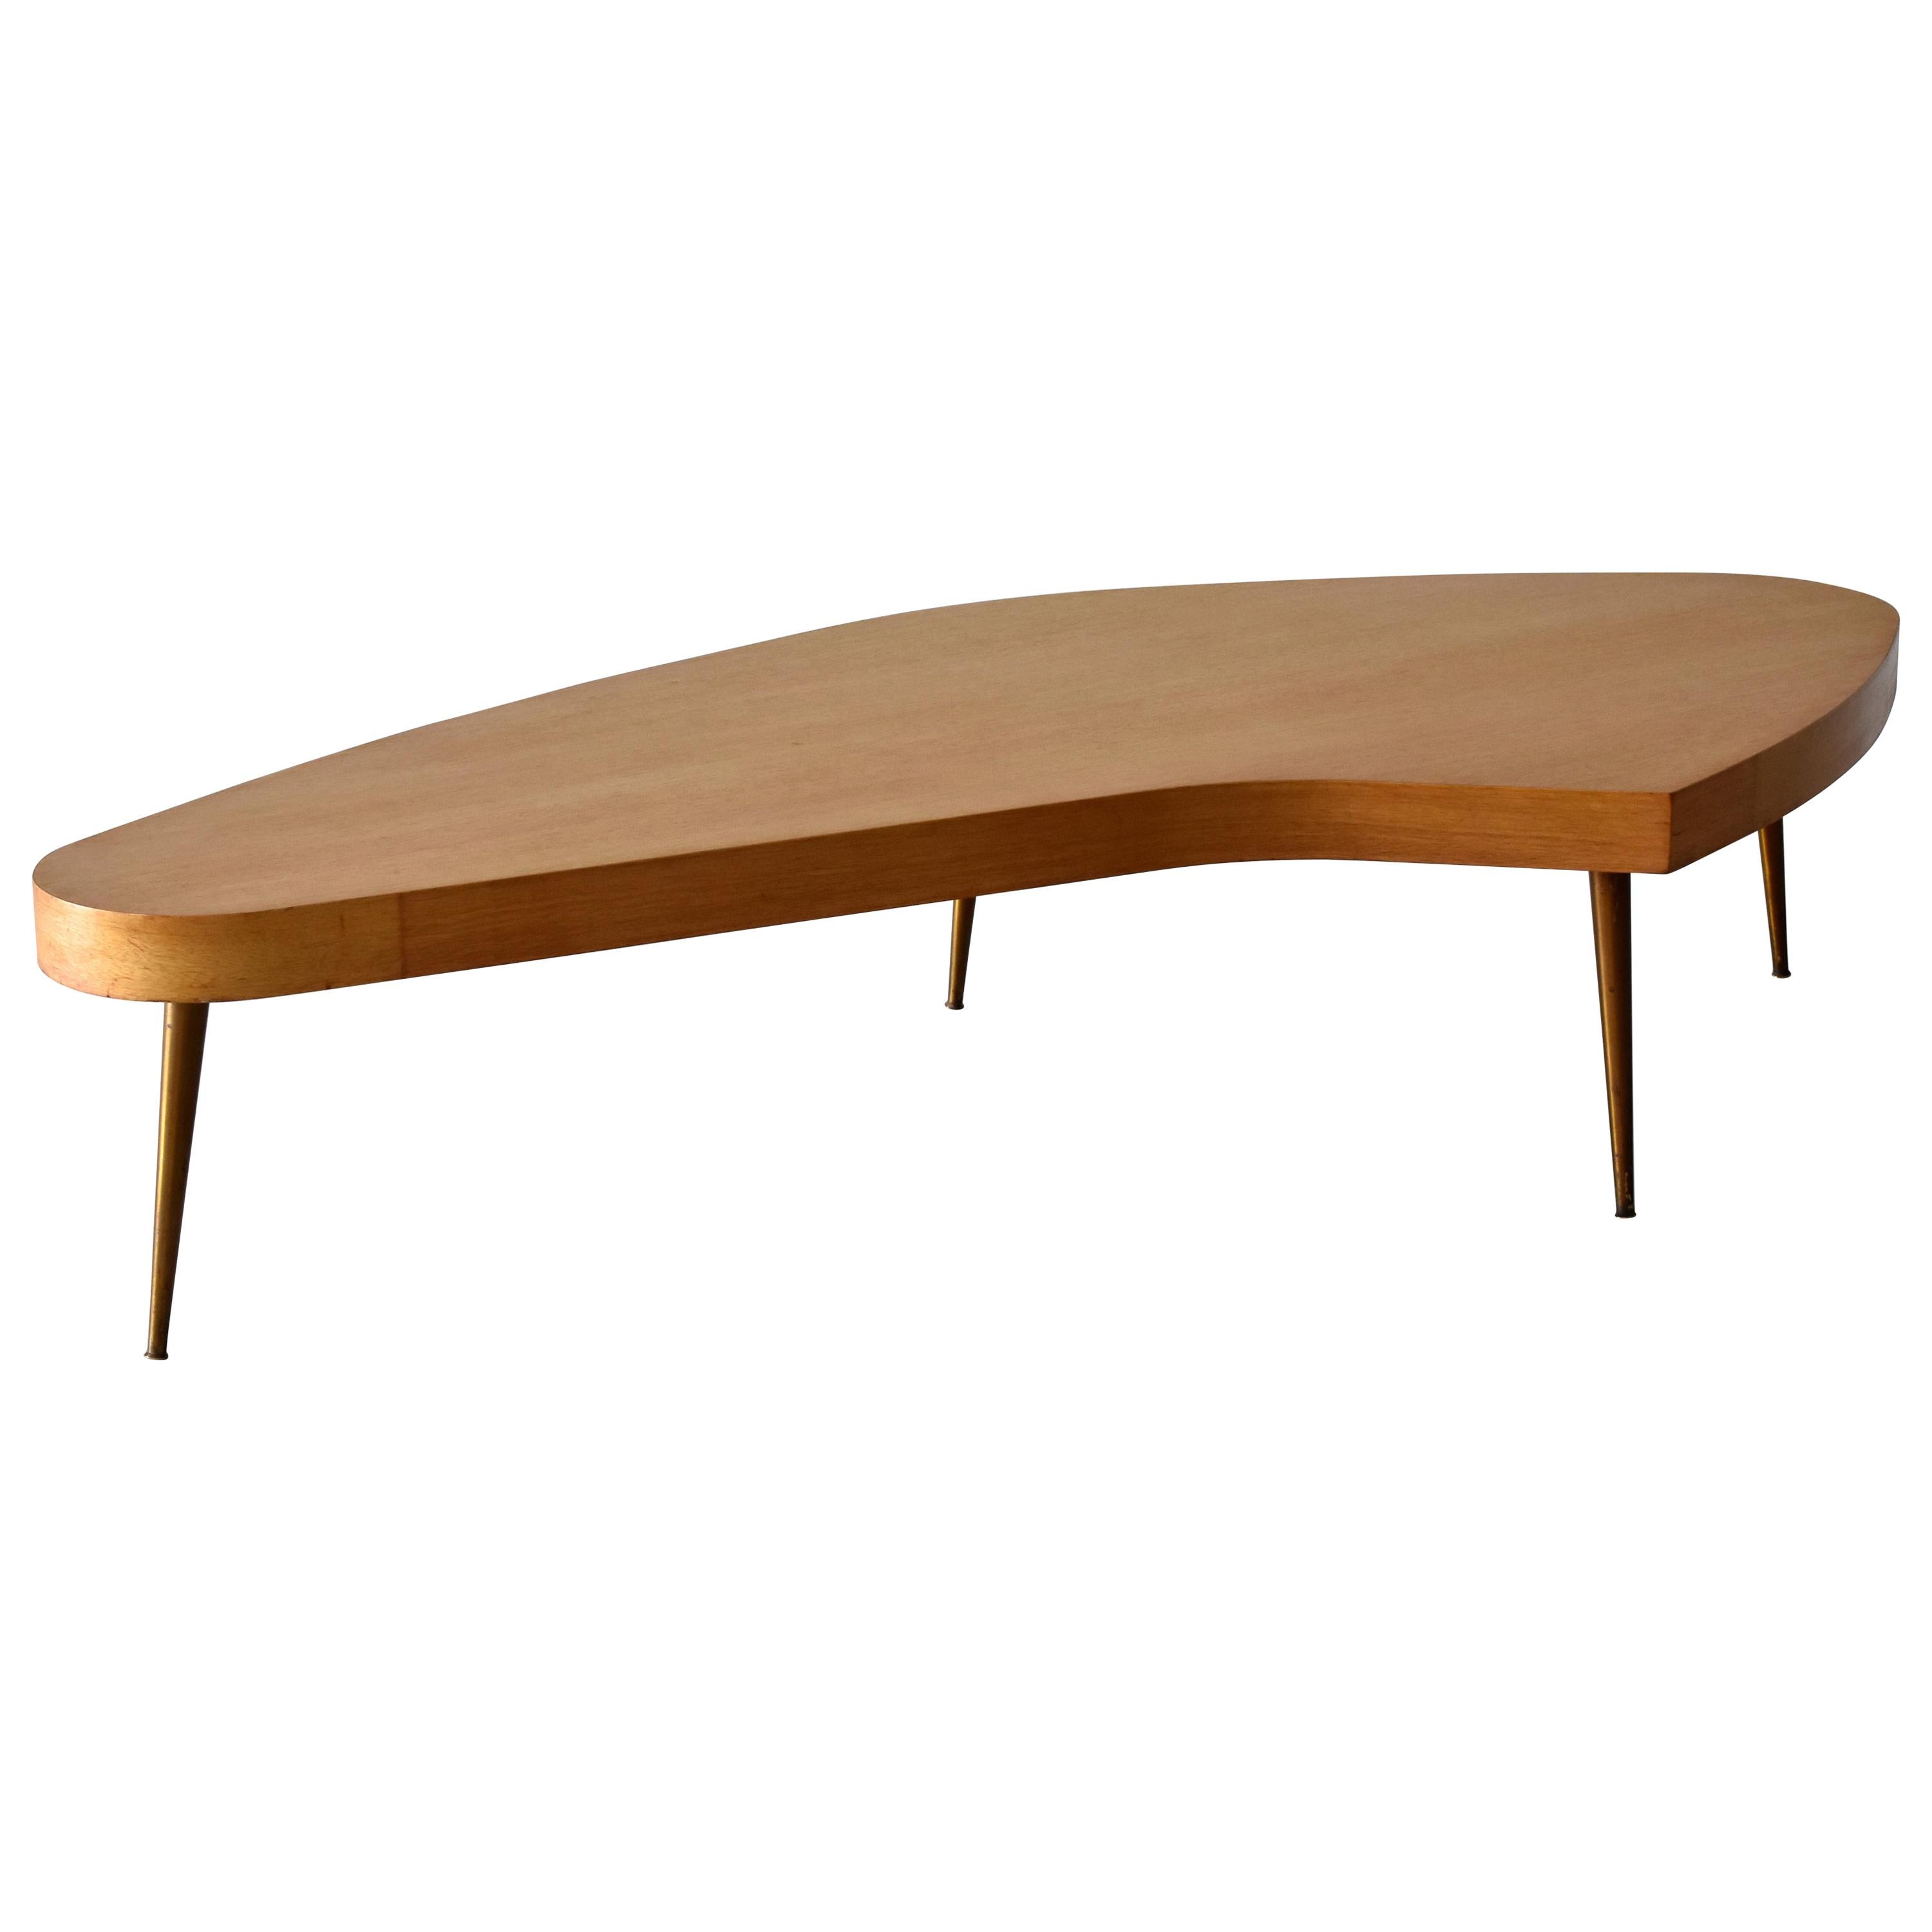 Modernist Free-Form Coffee or Cocktail Table, Oak, Brass Legs, America, 1950s